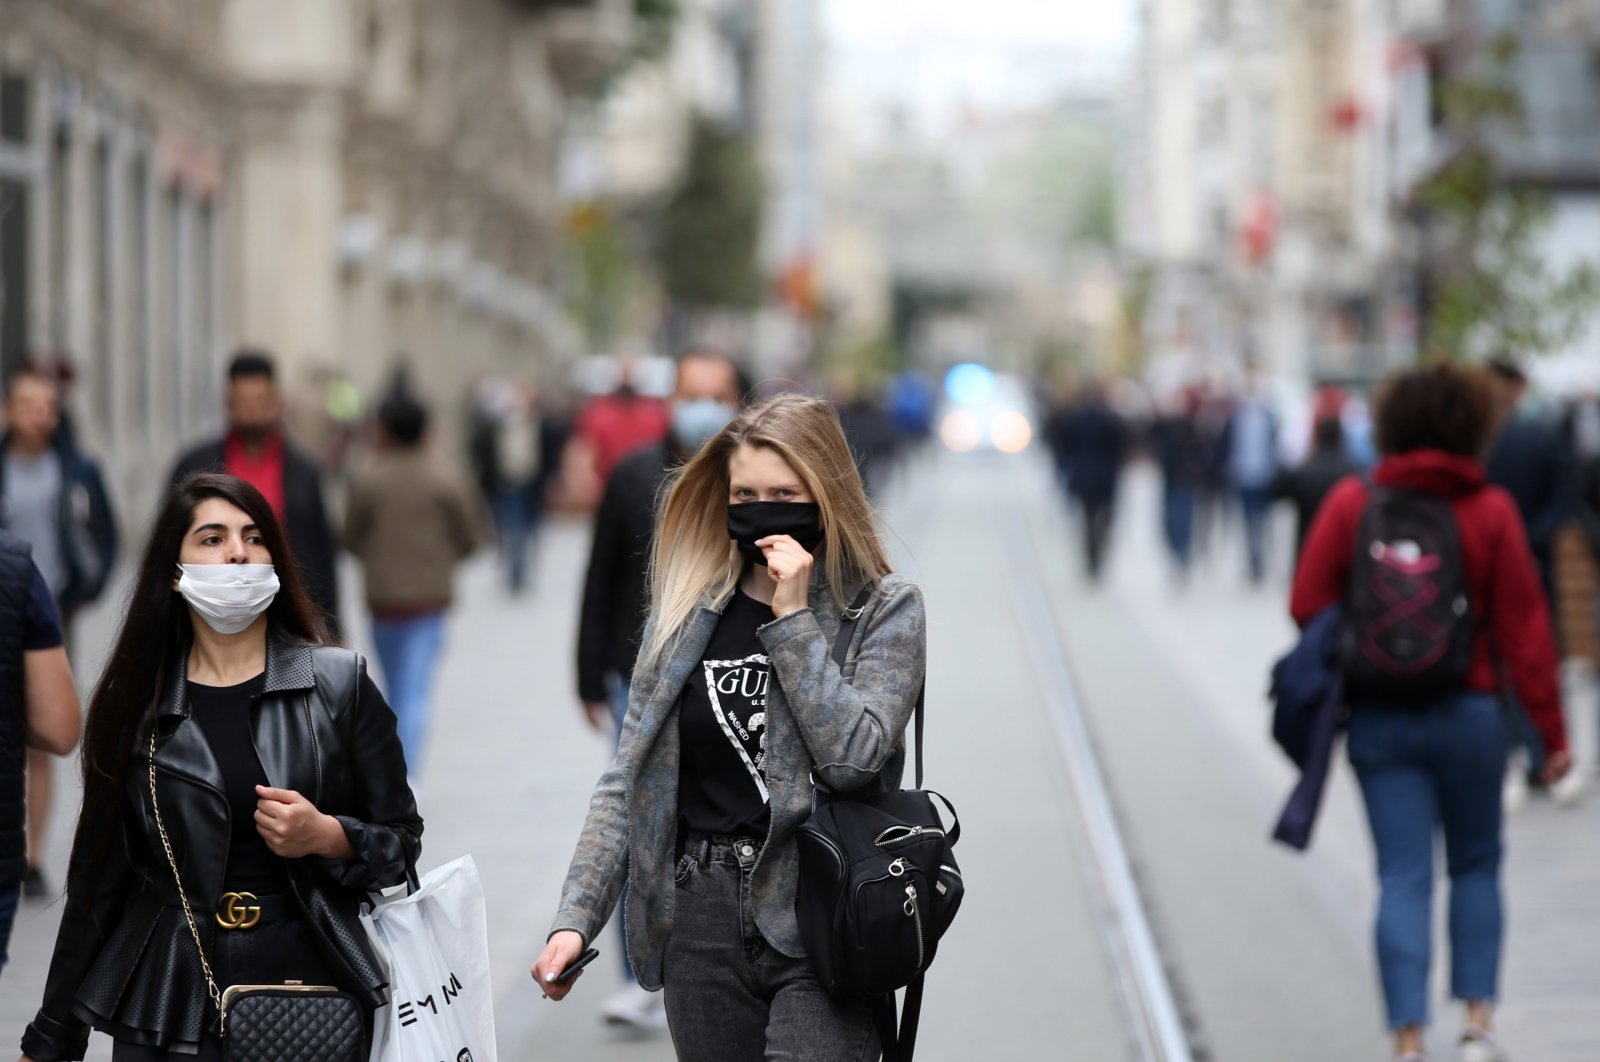 Two women walk on Istiklal Avenue wearing masks to protect against COVID-19, in Istanbul, Turkey, May 8, 2020. (AA Photo)